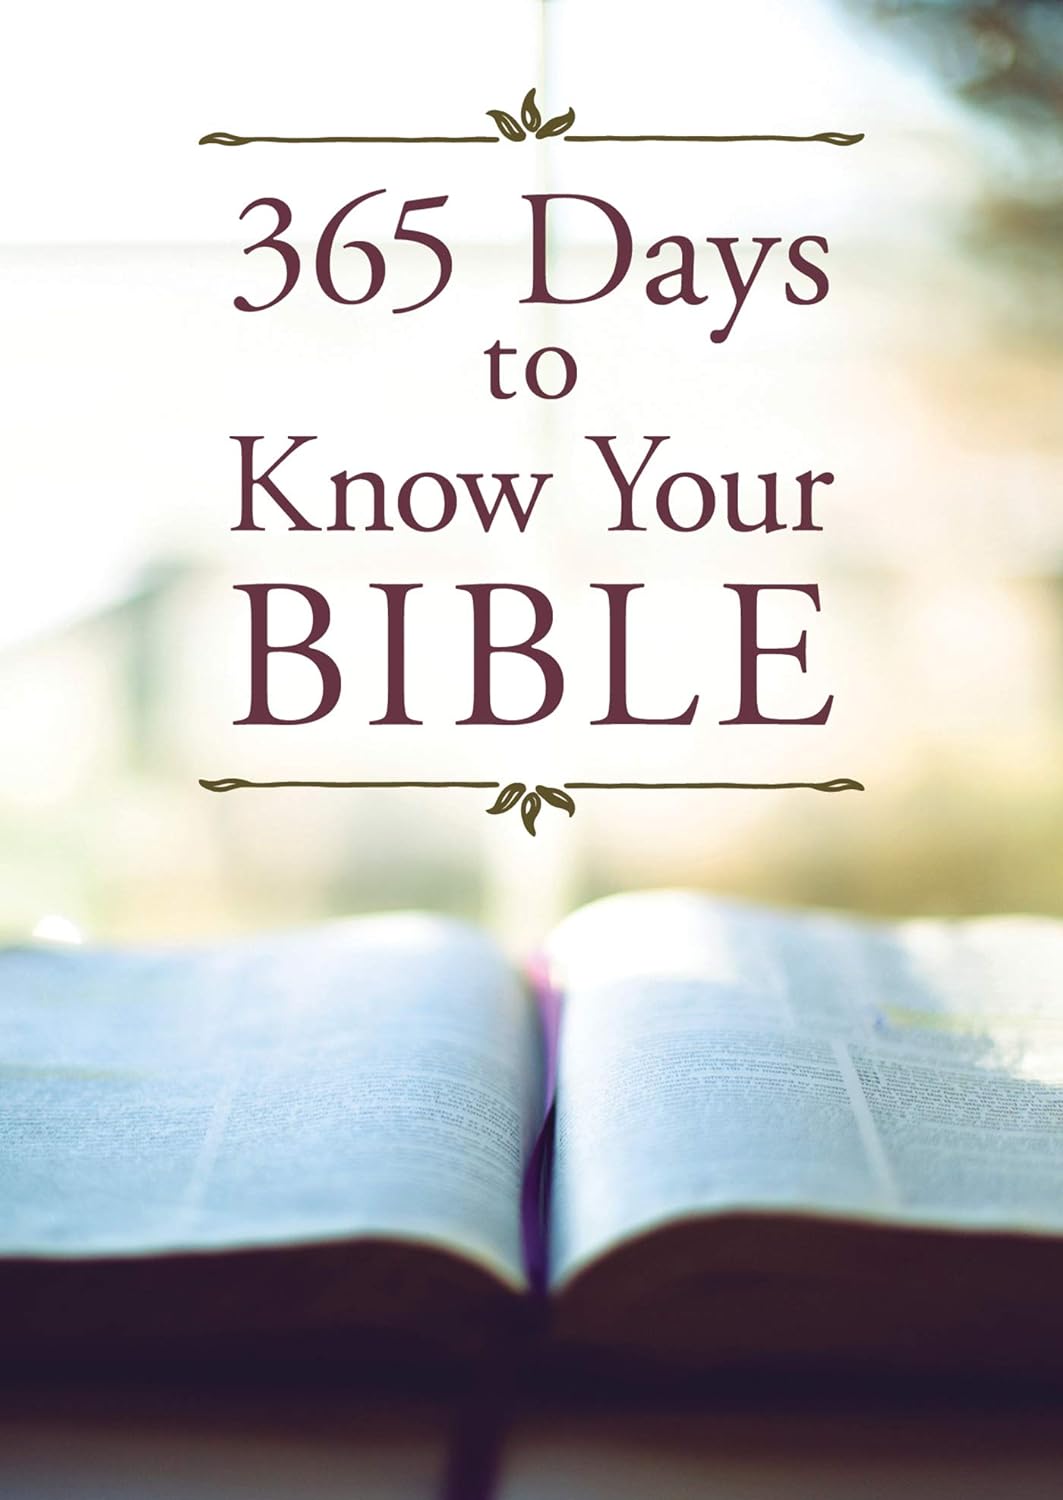 365 Days to Know Your Bible - Paul Kent